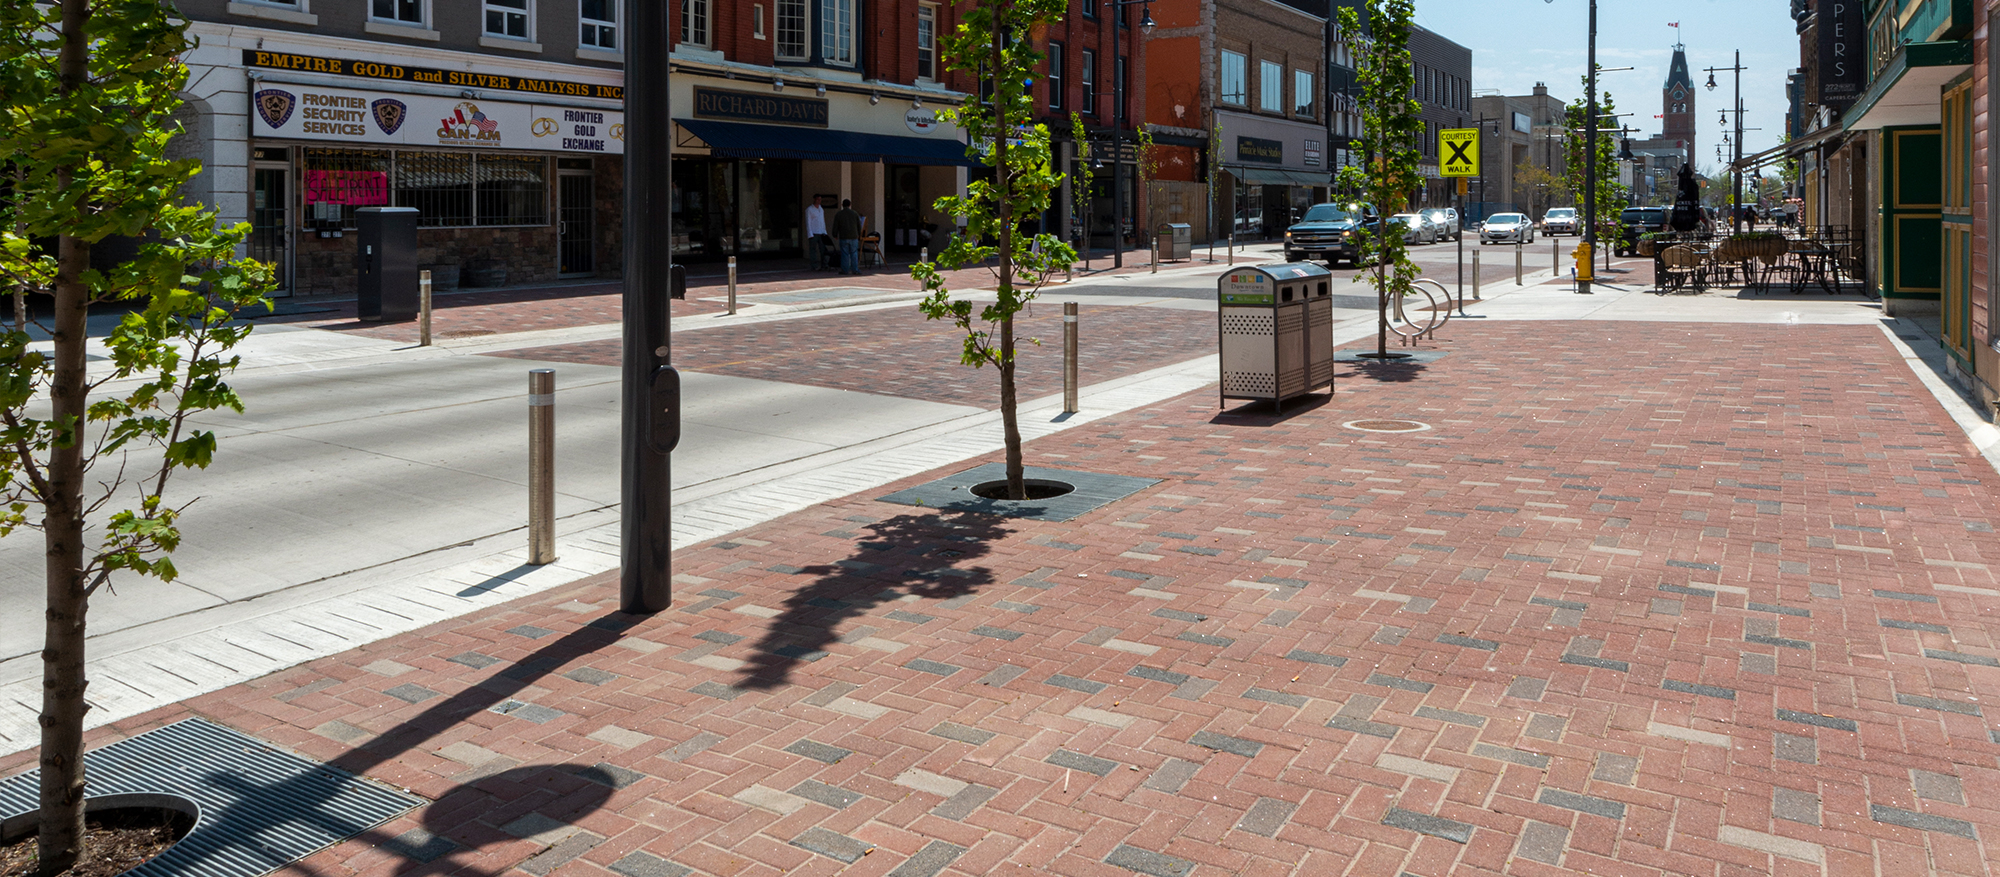  An old-fashioned streetscape with walkways and pedestrian areas made from multicolor Series pavers in a herringbone pattern. 